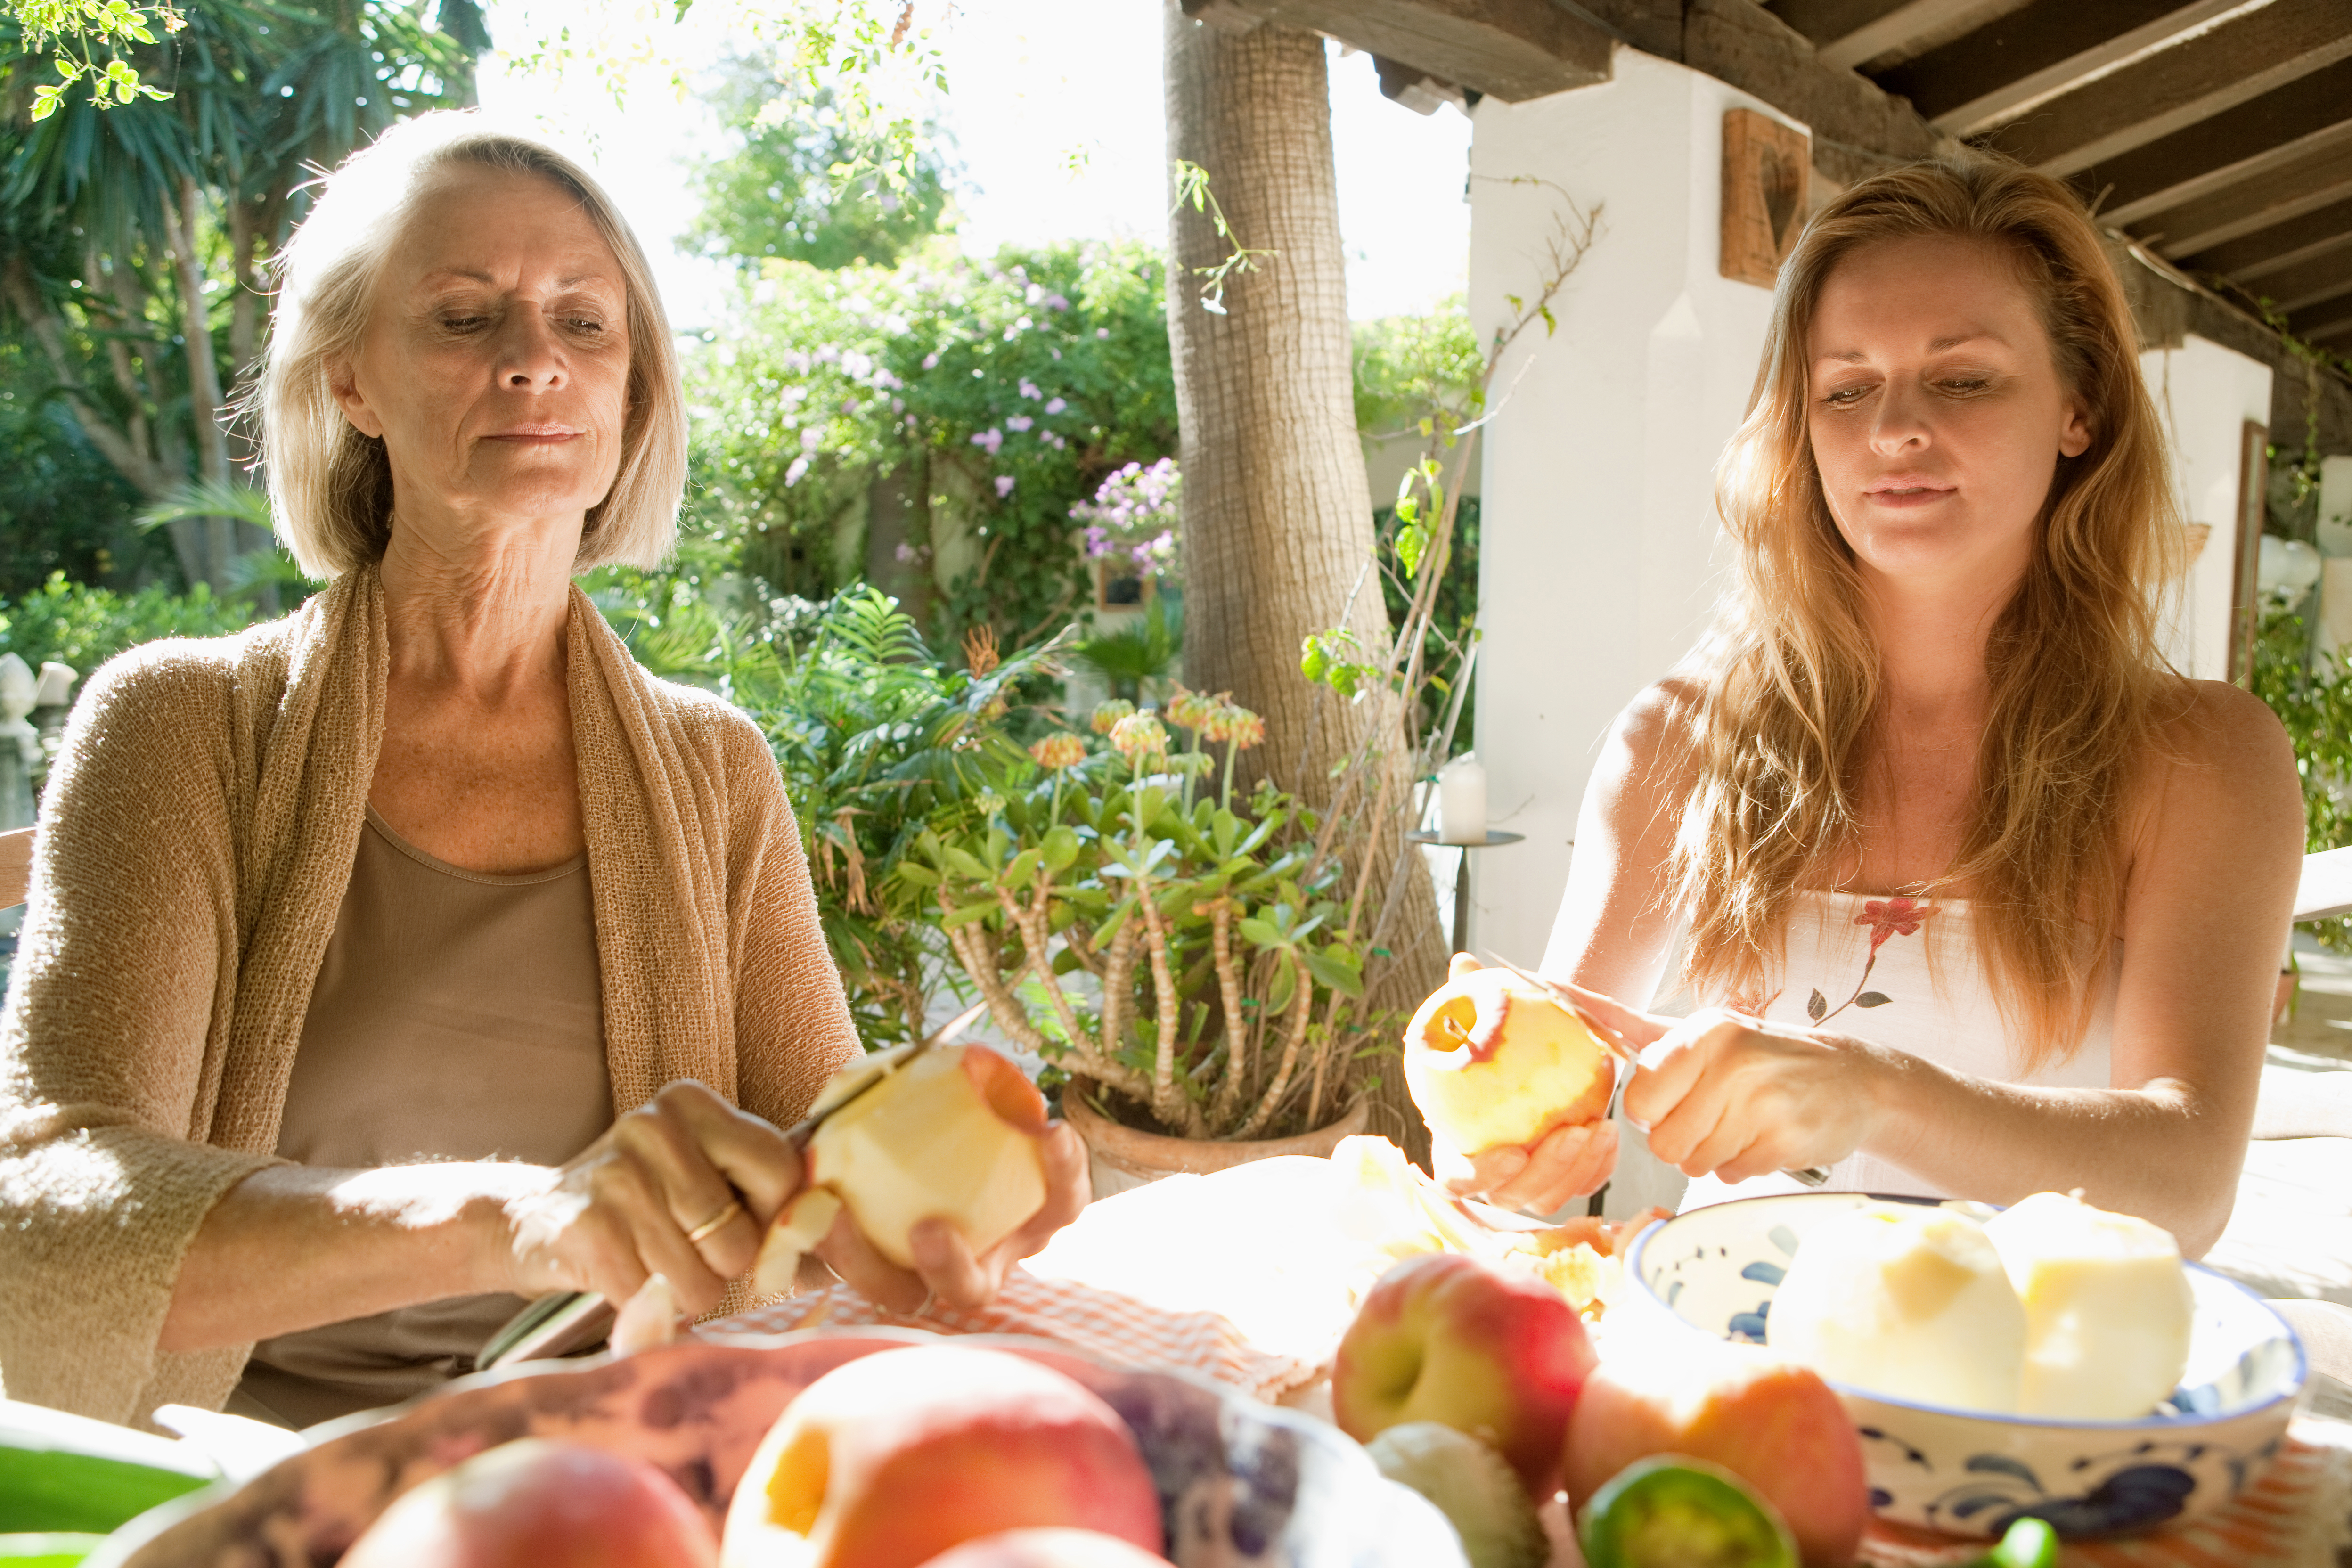 Two women at a dining table peeling apples | Source: Shutterstock